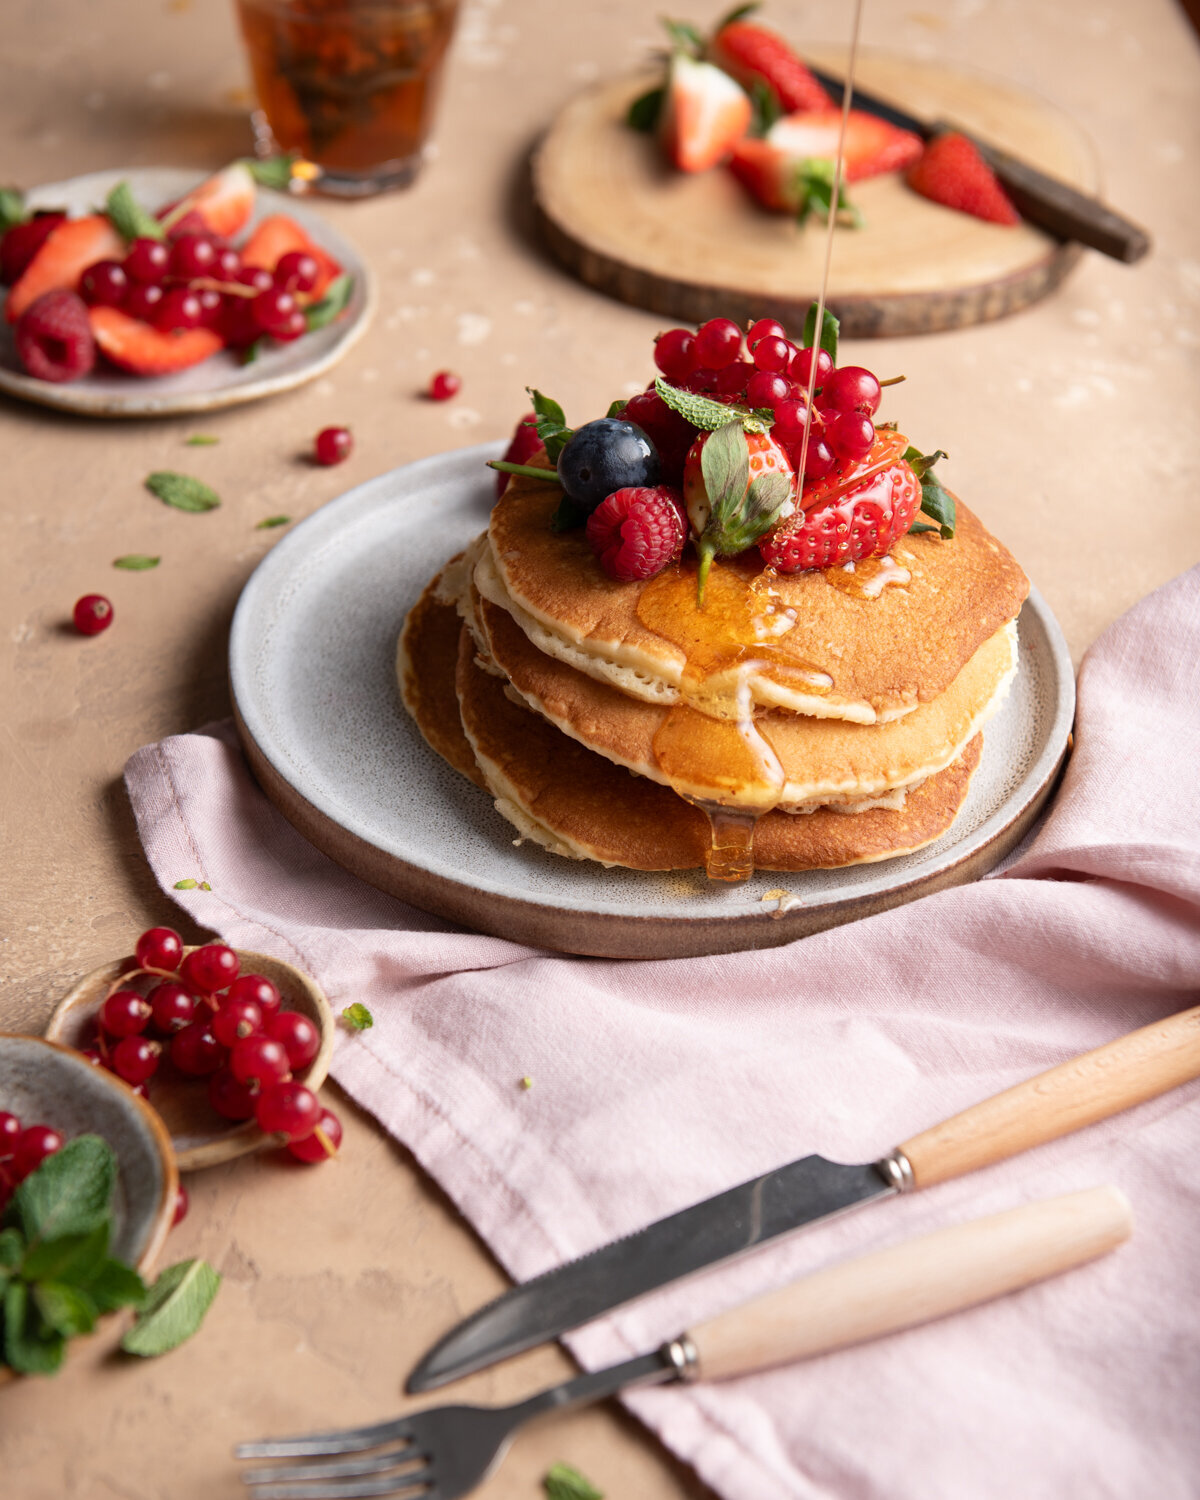 Omayah Atassi Dubai Food Photographer and Food Stylist Stack of Pancakes Topped with Fruit and Being Drizzled with Syrup